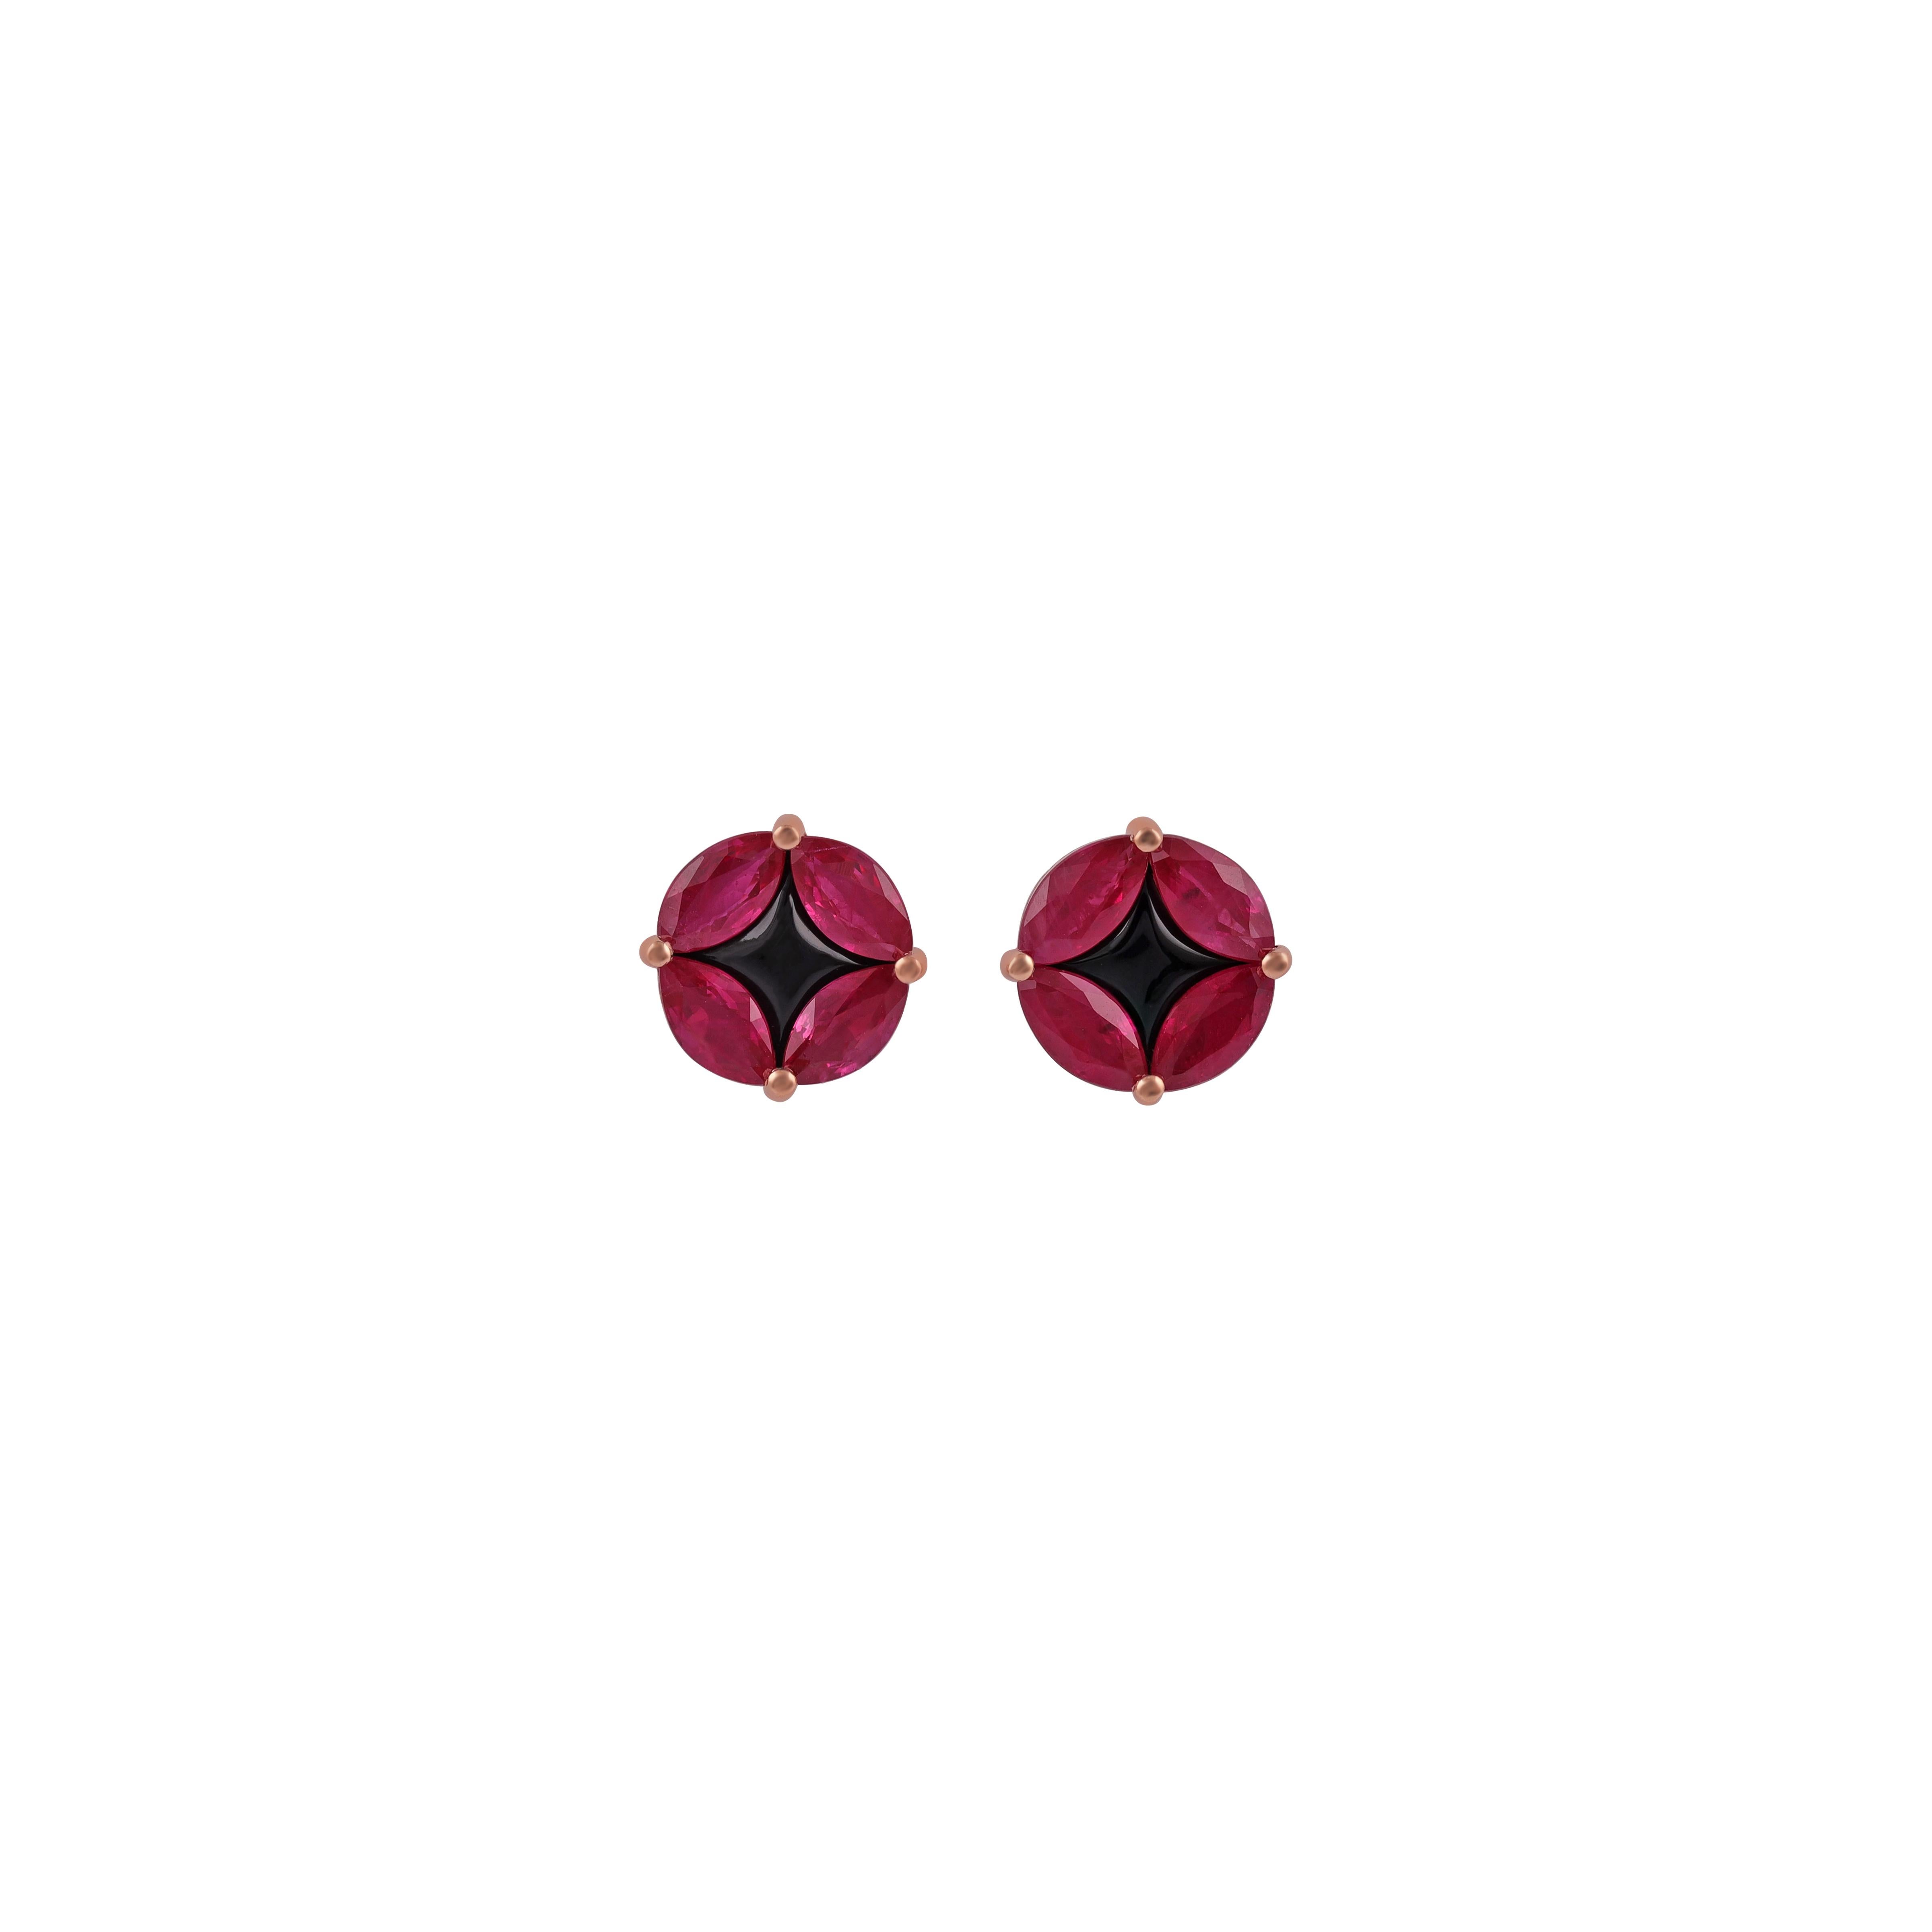 Magnificent ruby, Black onyx Earring studs. 

Ruby: 1.99 carats
Black onyx - 0.76 carat
Rose Gold - 3.45gm

